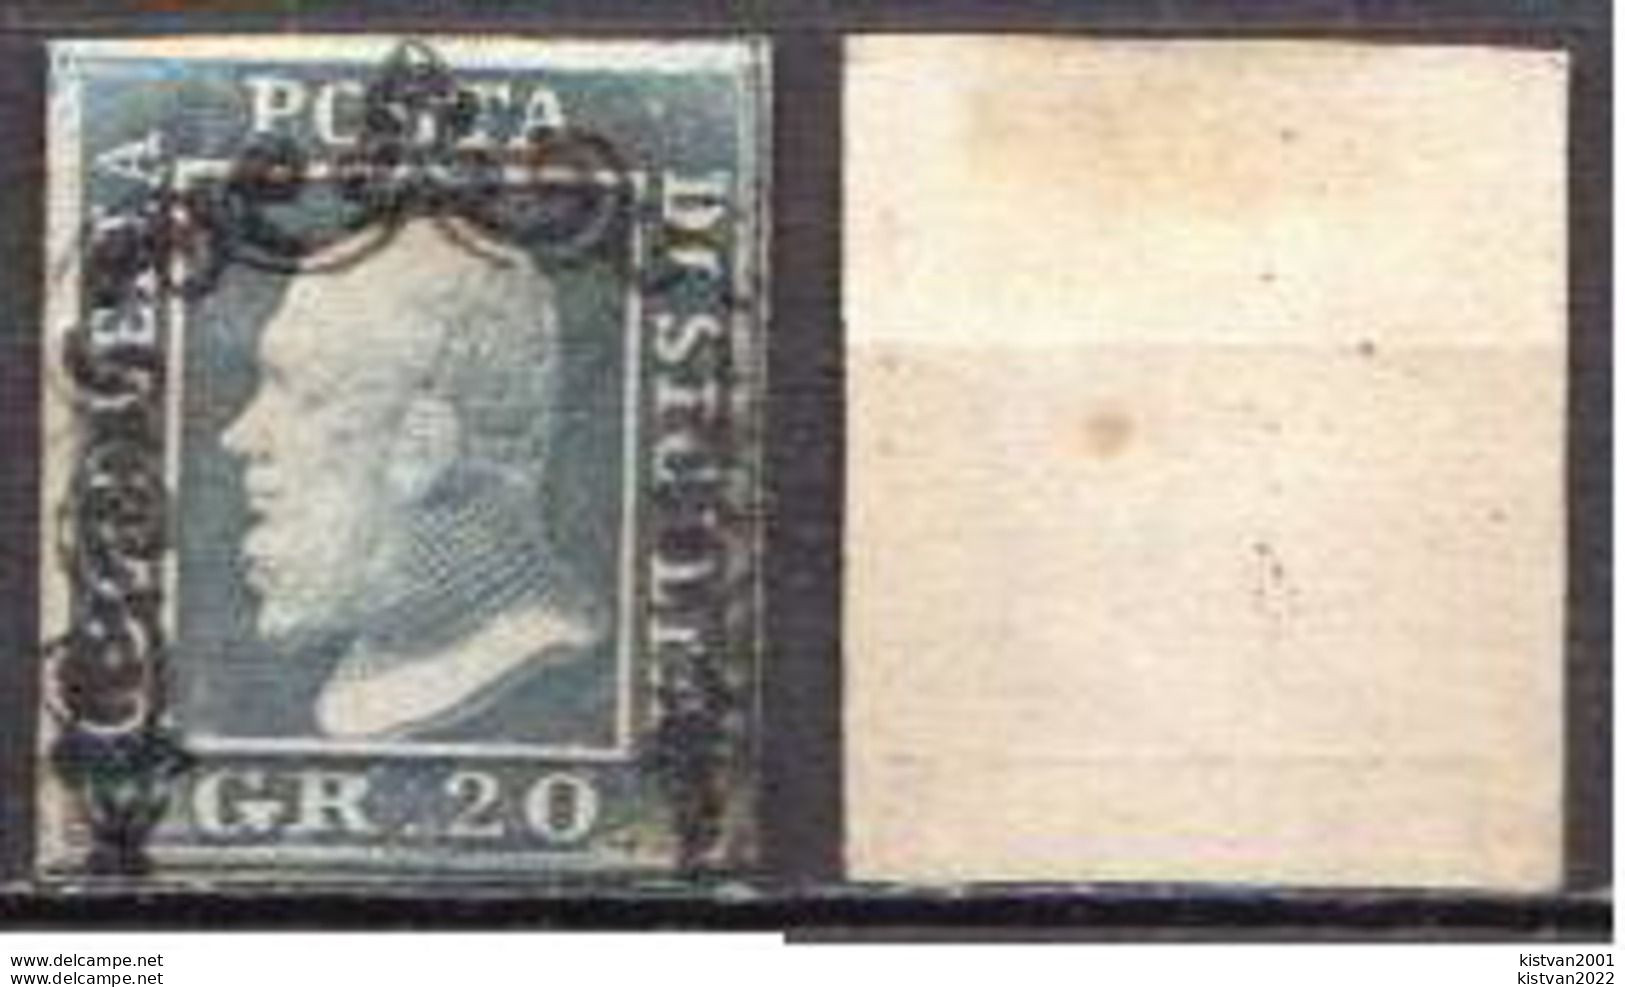 Italy Used Stamp, I Don't Know If Is It Original Or Not, FORGERY??? - Sicilia